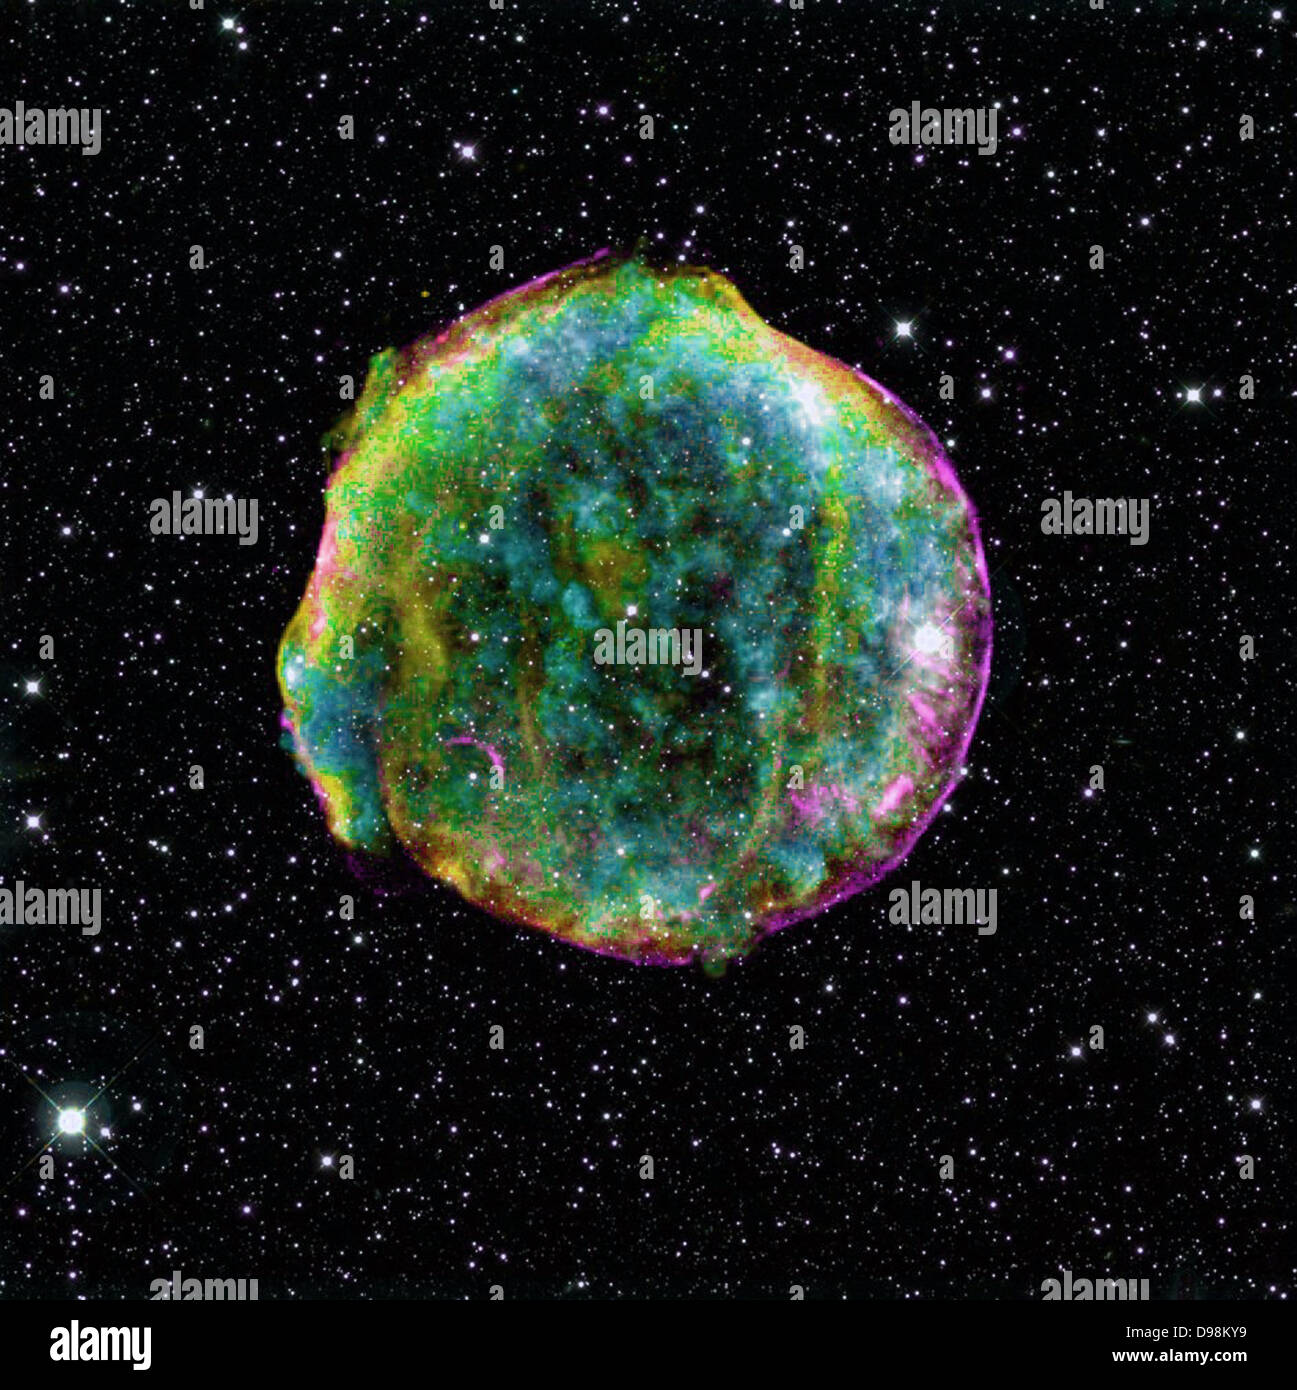 composite image of the Tycho supernova remnant combines infrared and X-ray observations obtained with NASA's Spitzer and Stock Photo